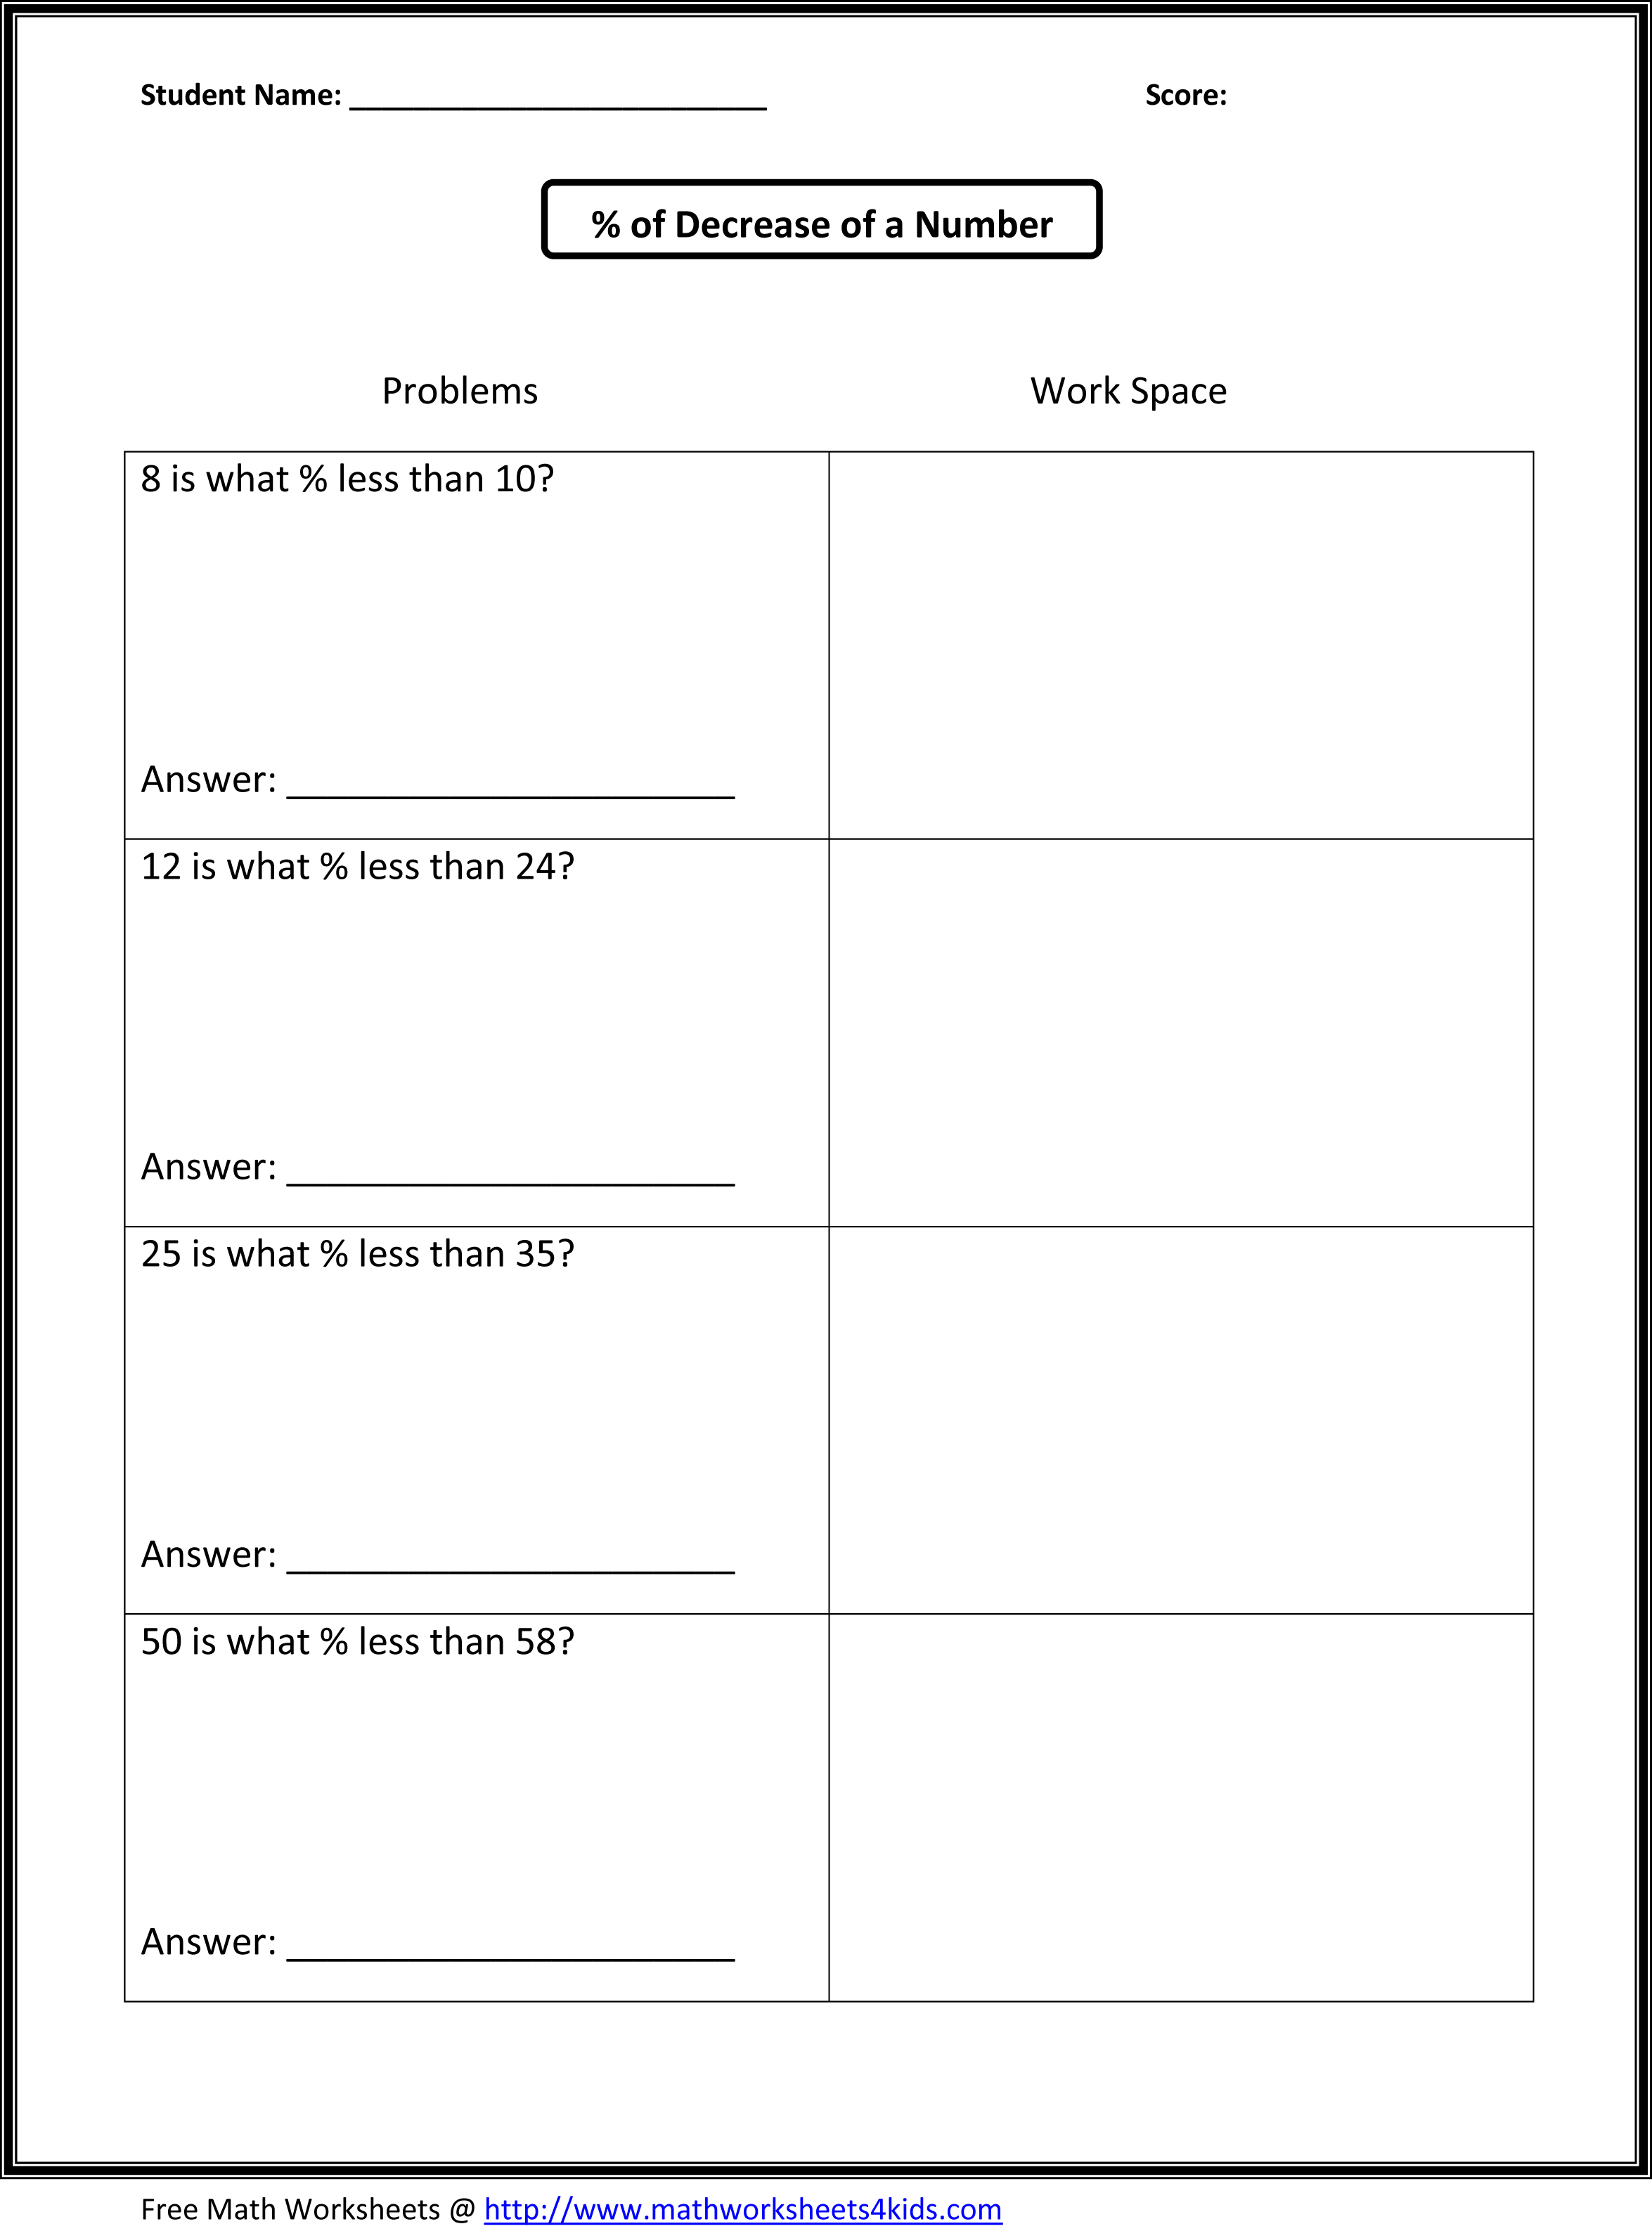 Ratios And Unit Rate - Lessons - Blendspace Throughout Unit Rate Worksheet 7th Grade